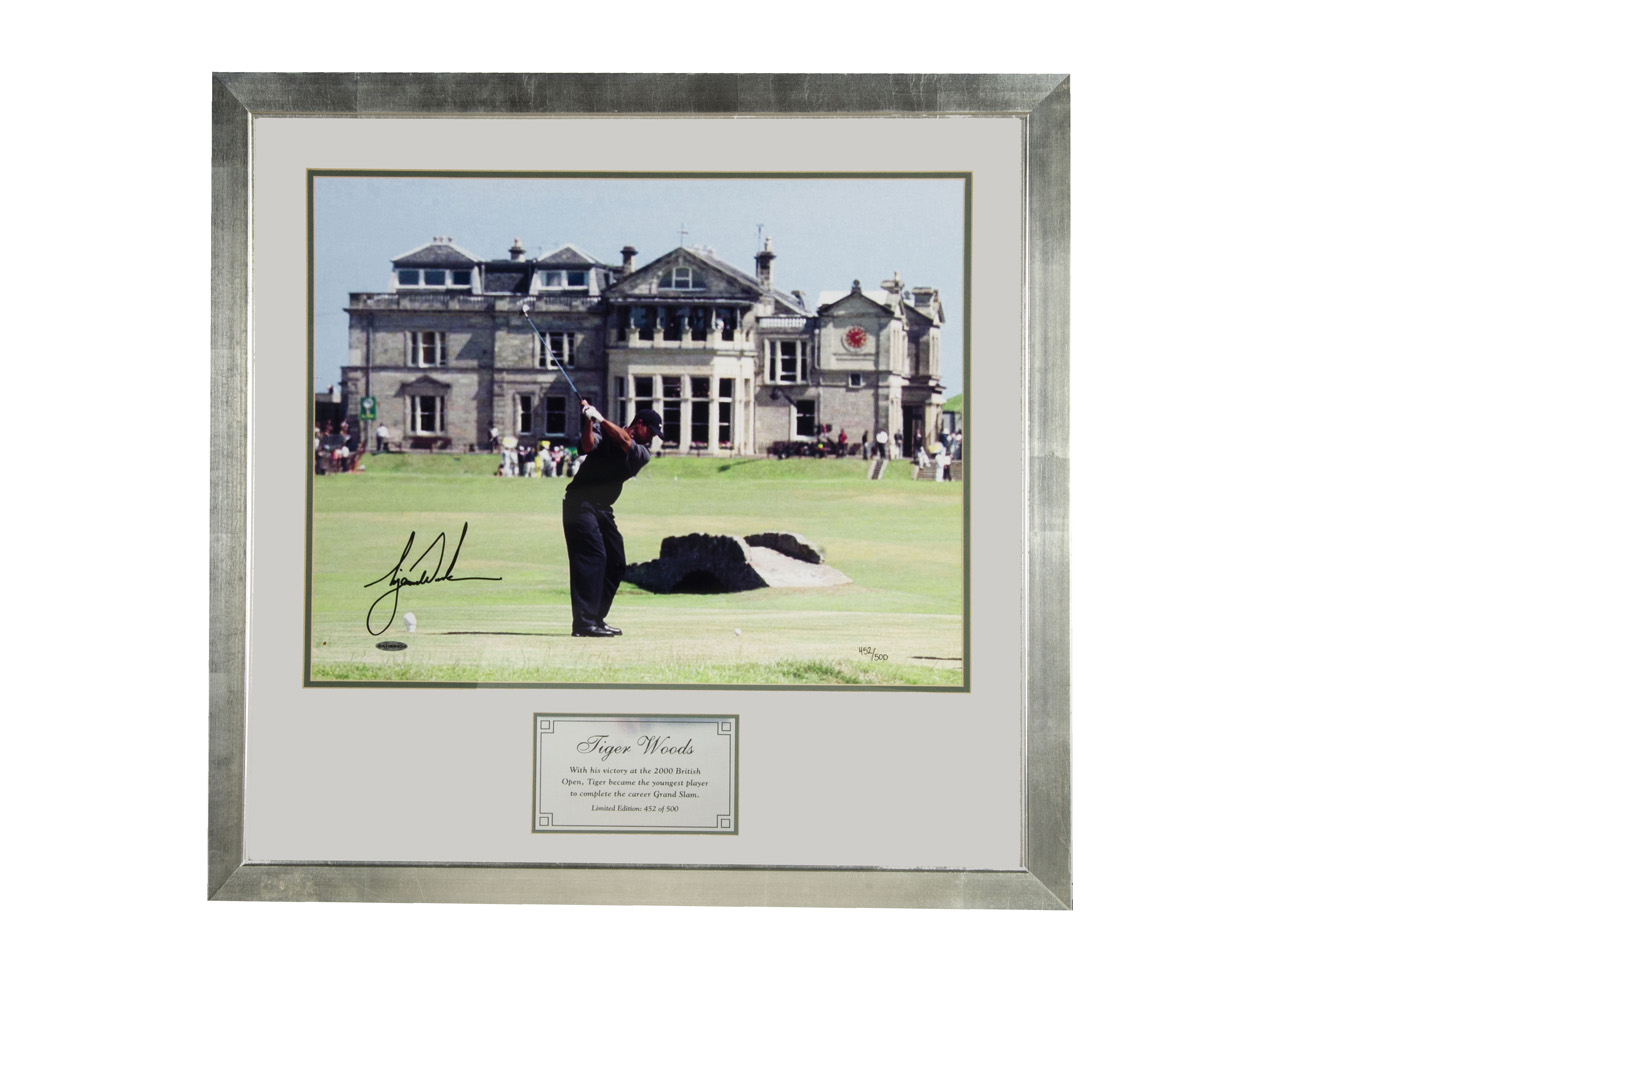 large signed photograph of Tiger Woods